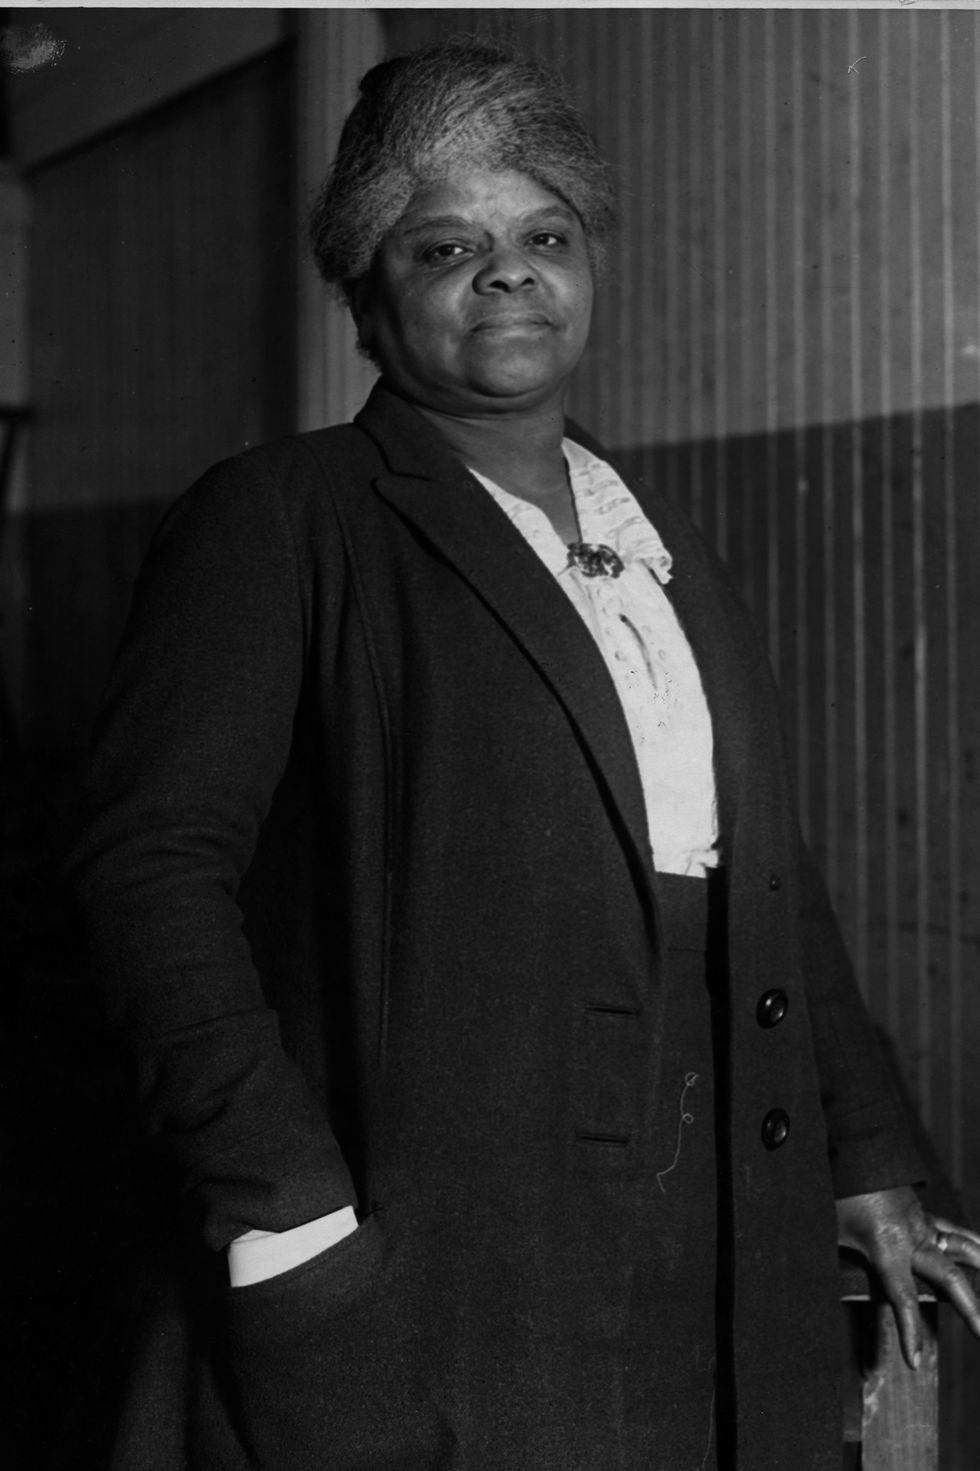 ida b wells stands and looks at the camera, she wears a long jacket, light colored blouse and dark bottoms